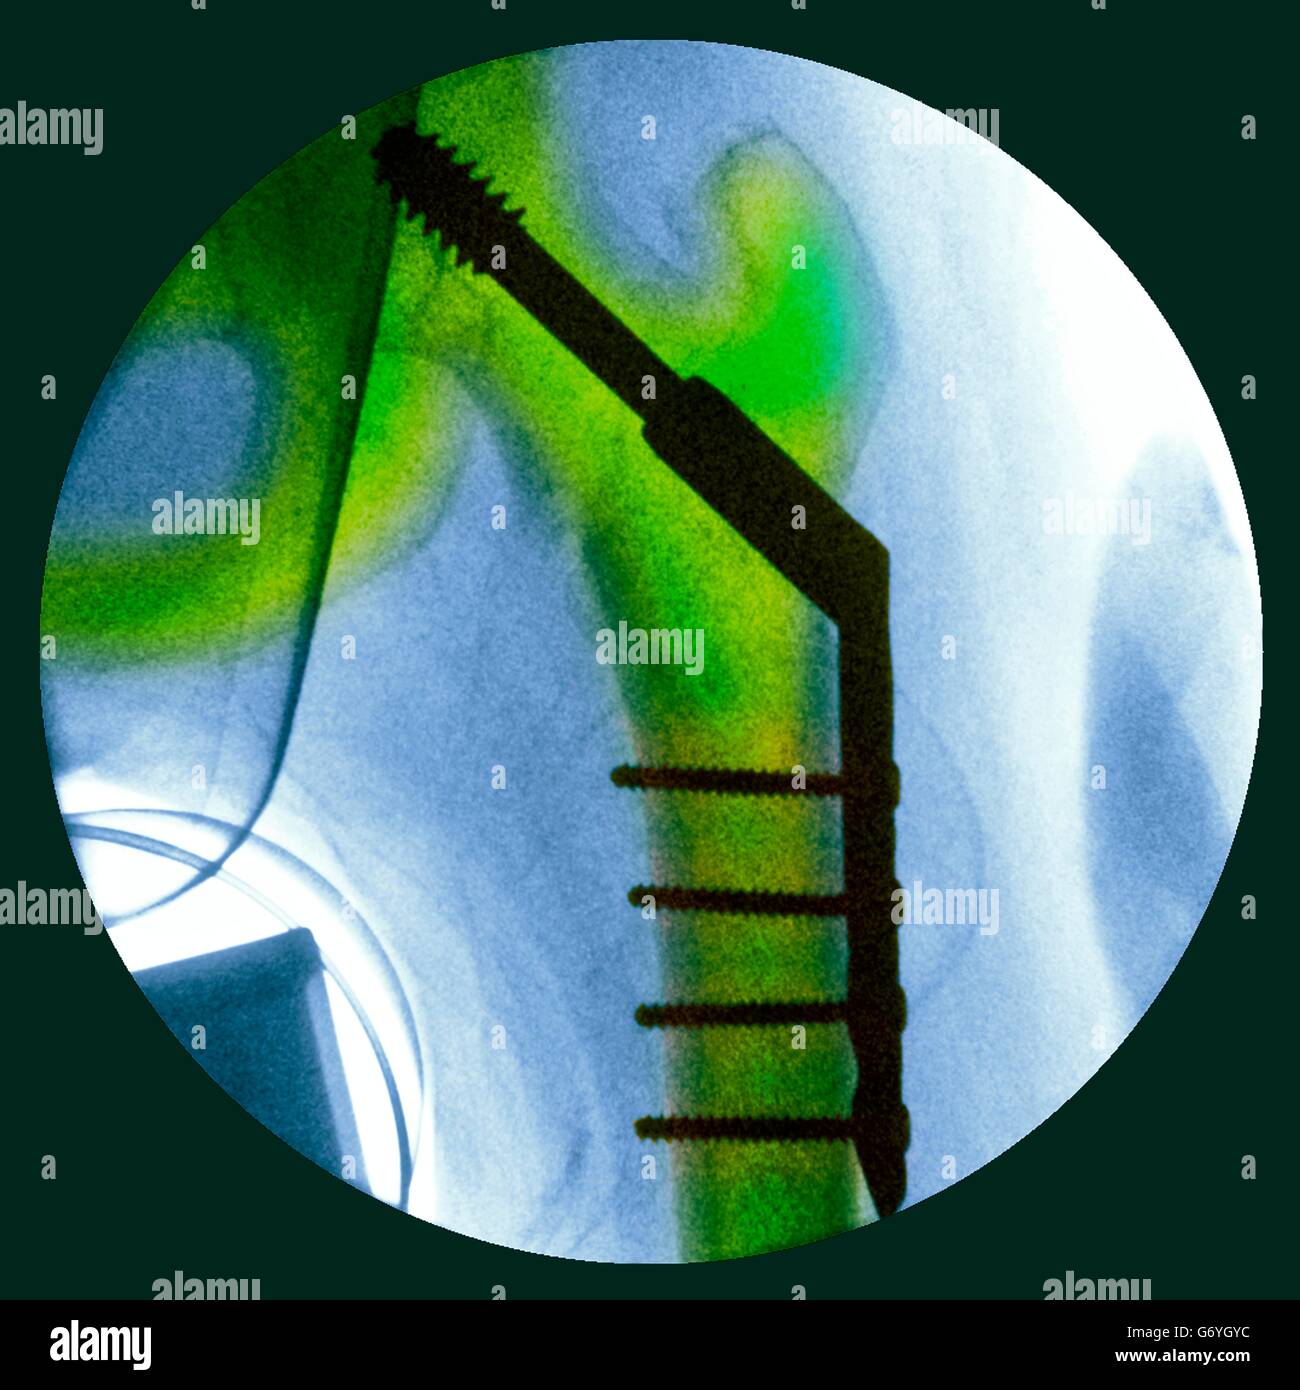 Pinned fractured hip. Coloured X-ray of a section through the hip of a 91-year-old female patient with a fracture affecting the head of the femur (thigh bone, vertical), showing plates and pins (black) being used to fix the broken bone in place during hea Stock Photo